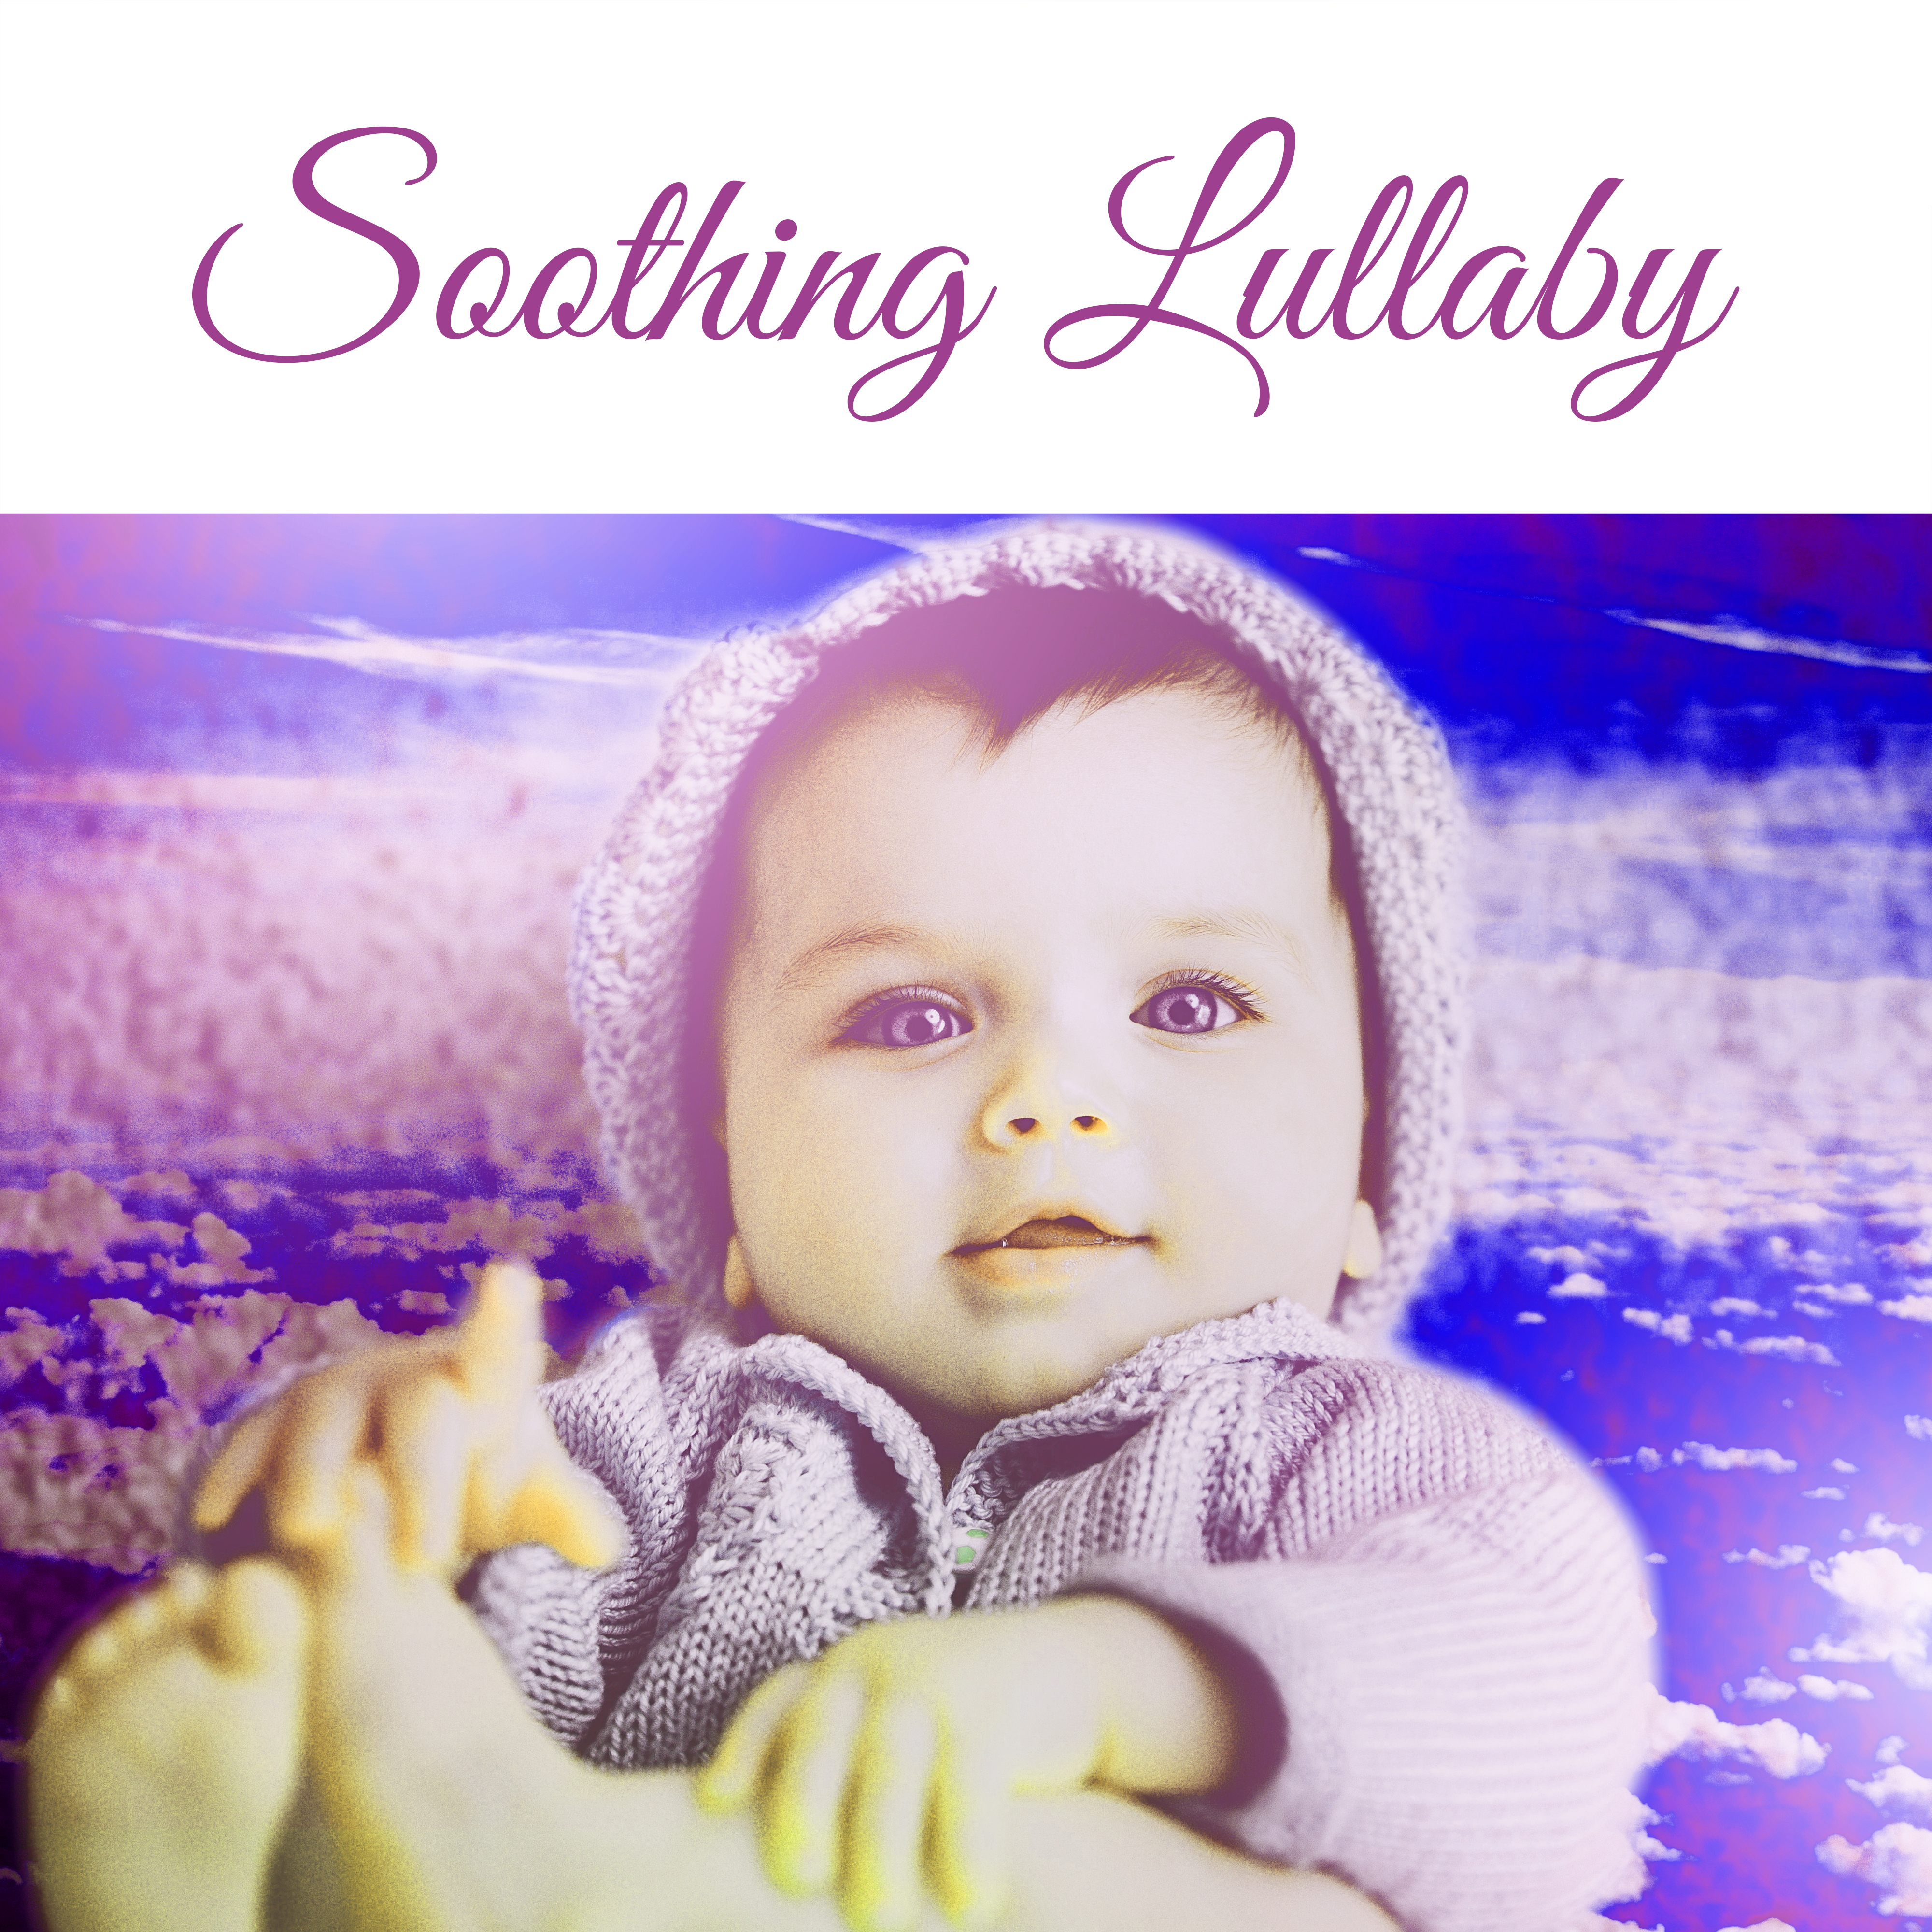 Soothing Lullaby  Music for Baby, Gentle Sounds for Sleep, Lullabies to Bed, Deep Sleep Child